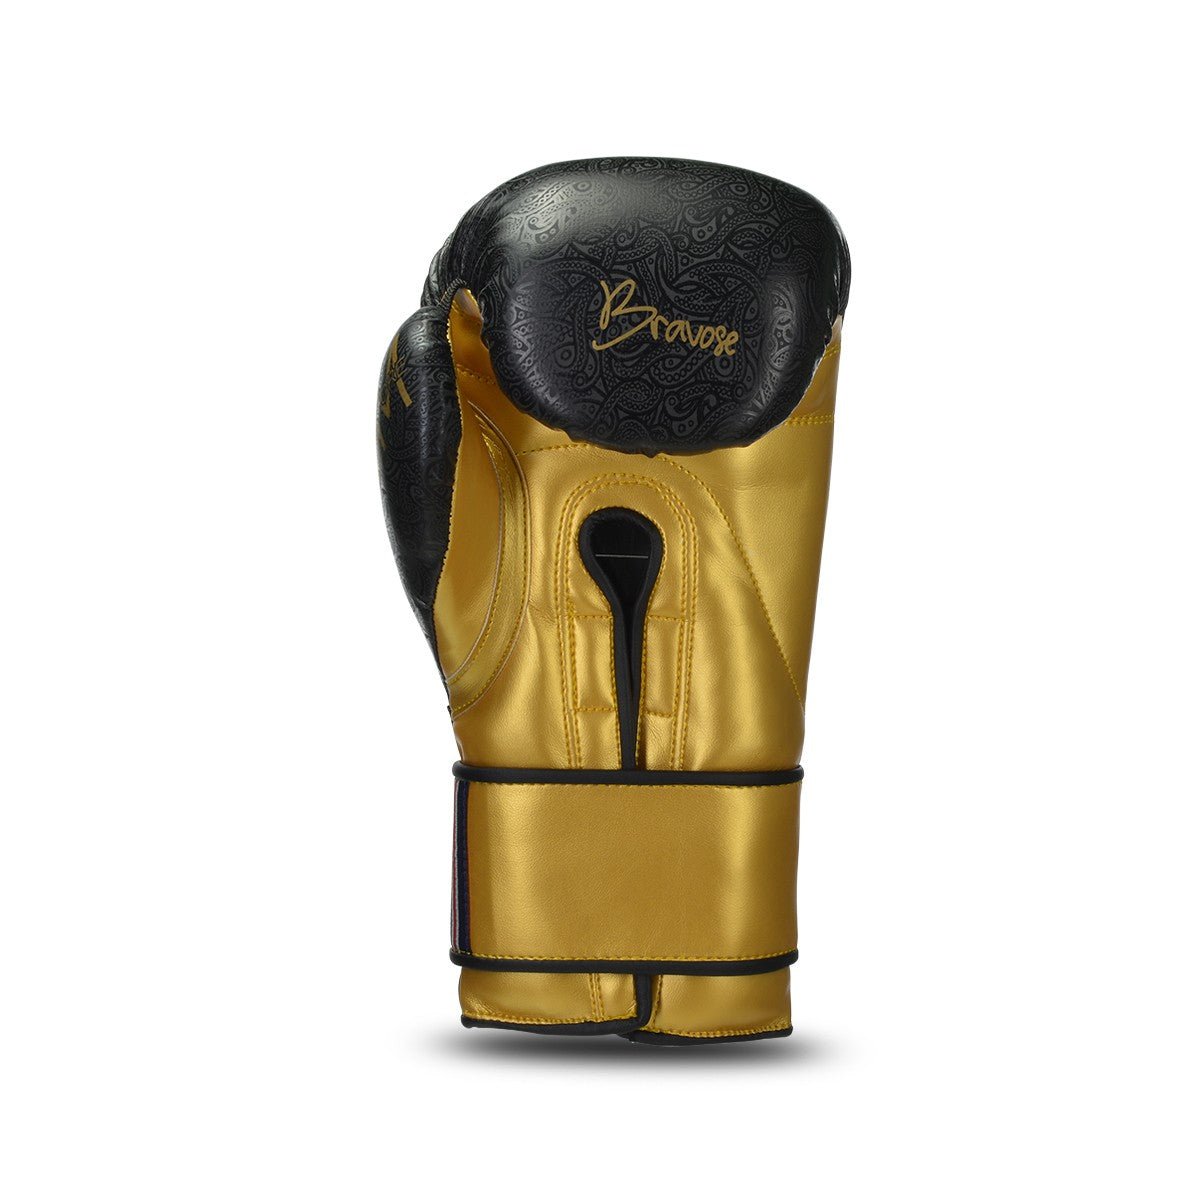 Boxing Gloves Nemesis Black and Gold Professional Mitts - KME means the very best